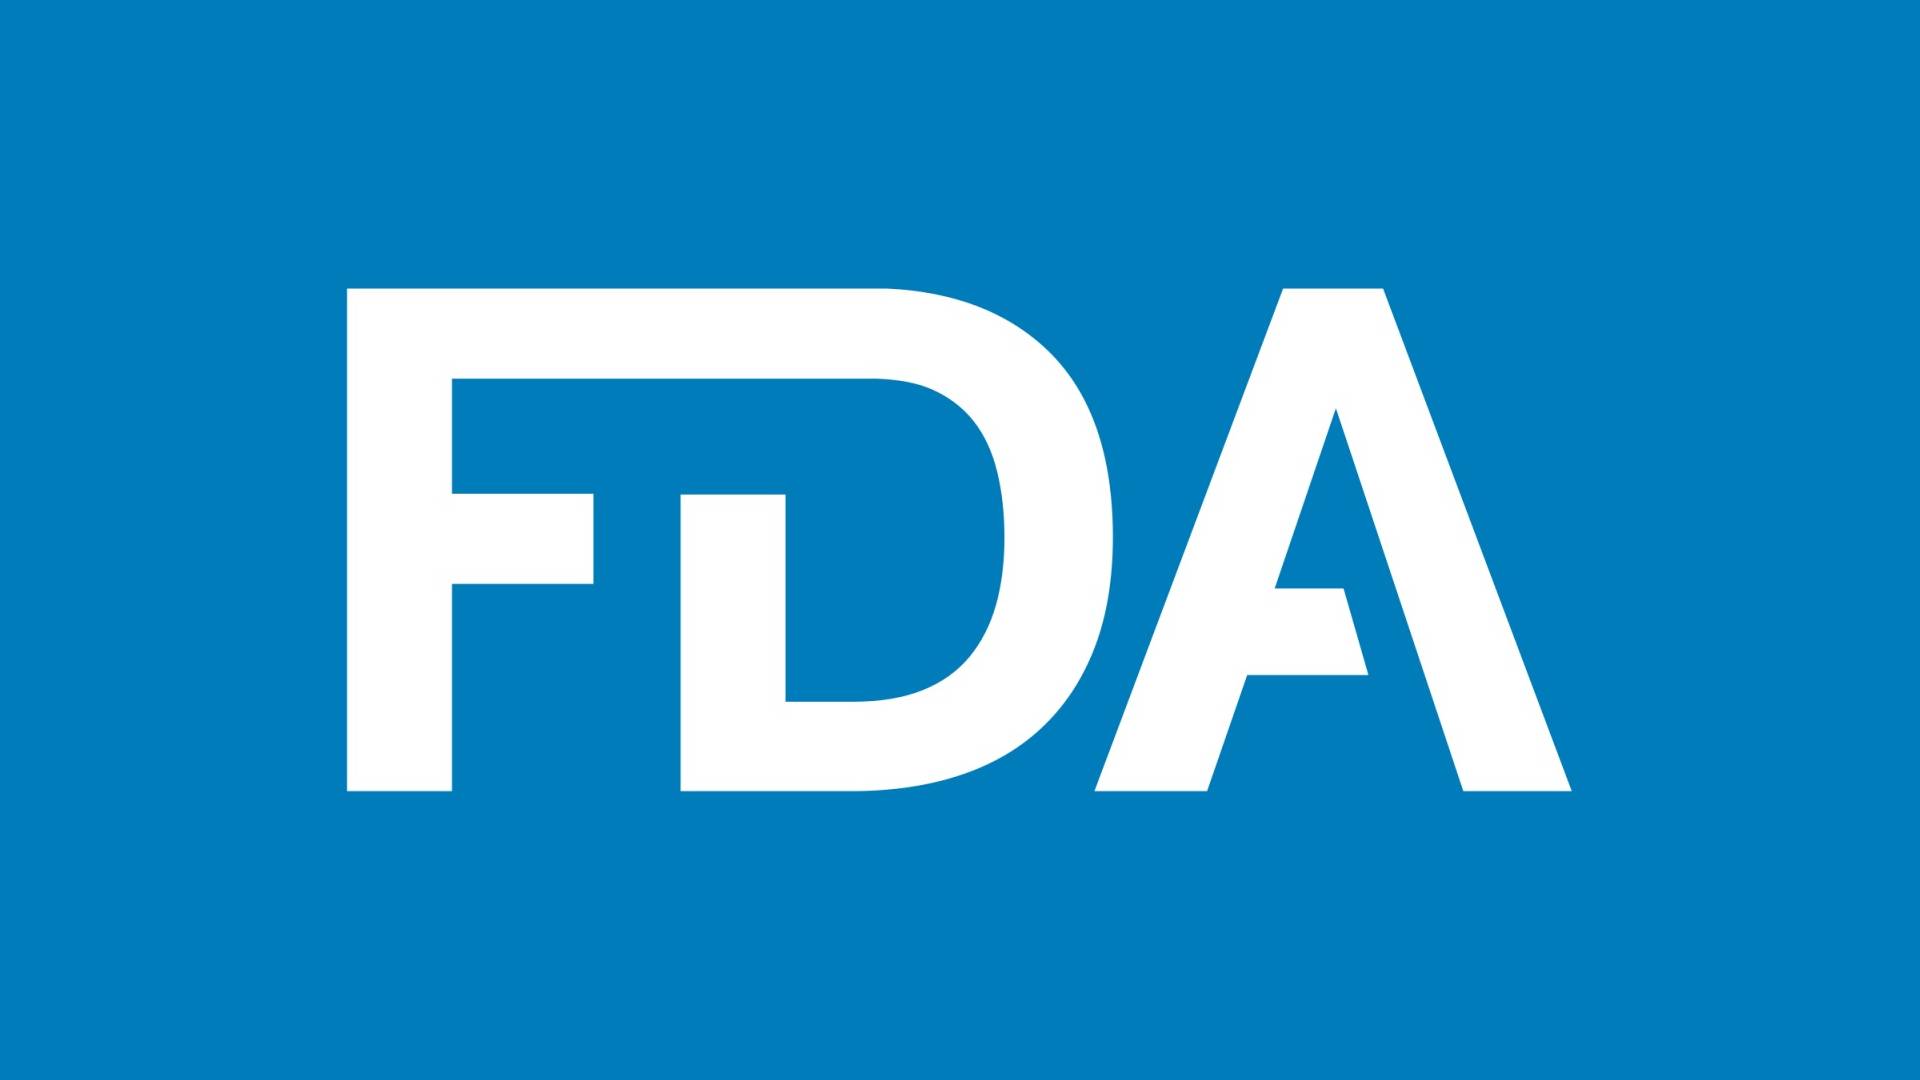 Health News Roundup: US FDA approves Merck's therapy for rare lung condition; US Supreme Court appears skeptical of challenge to abortion pill access and more